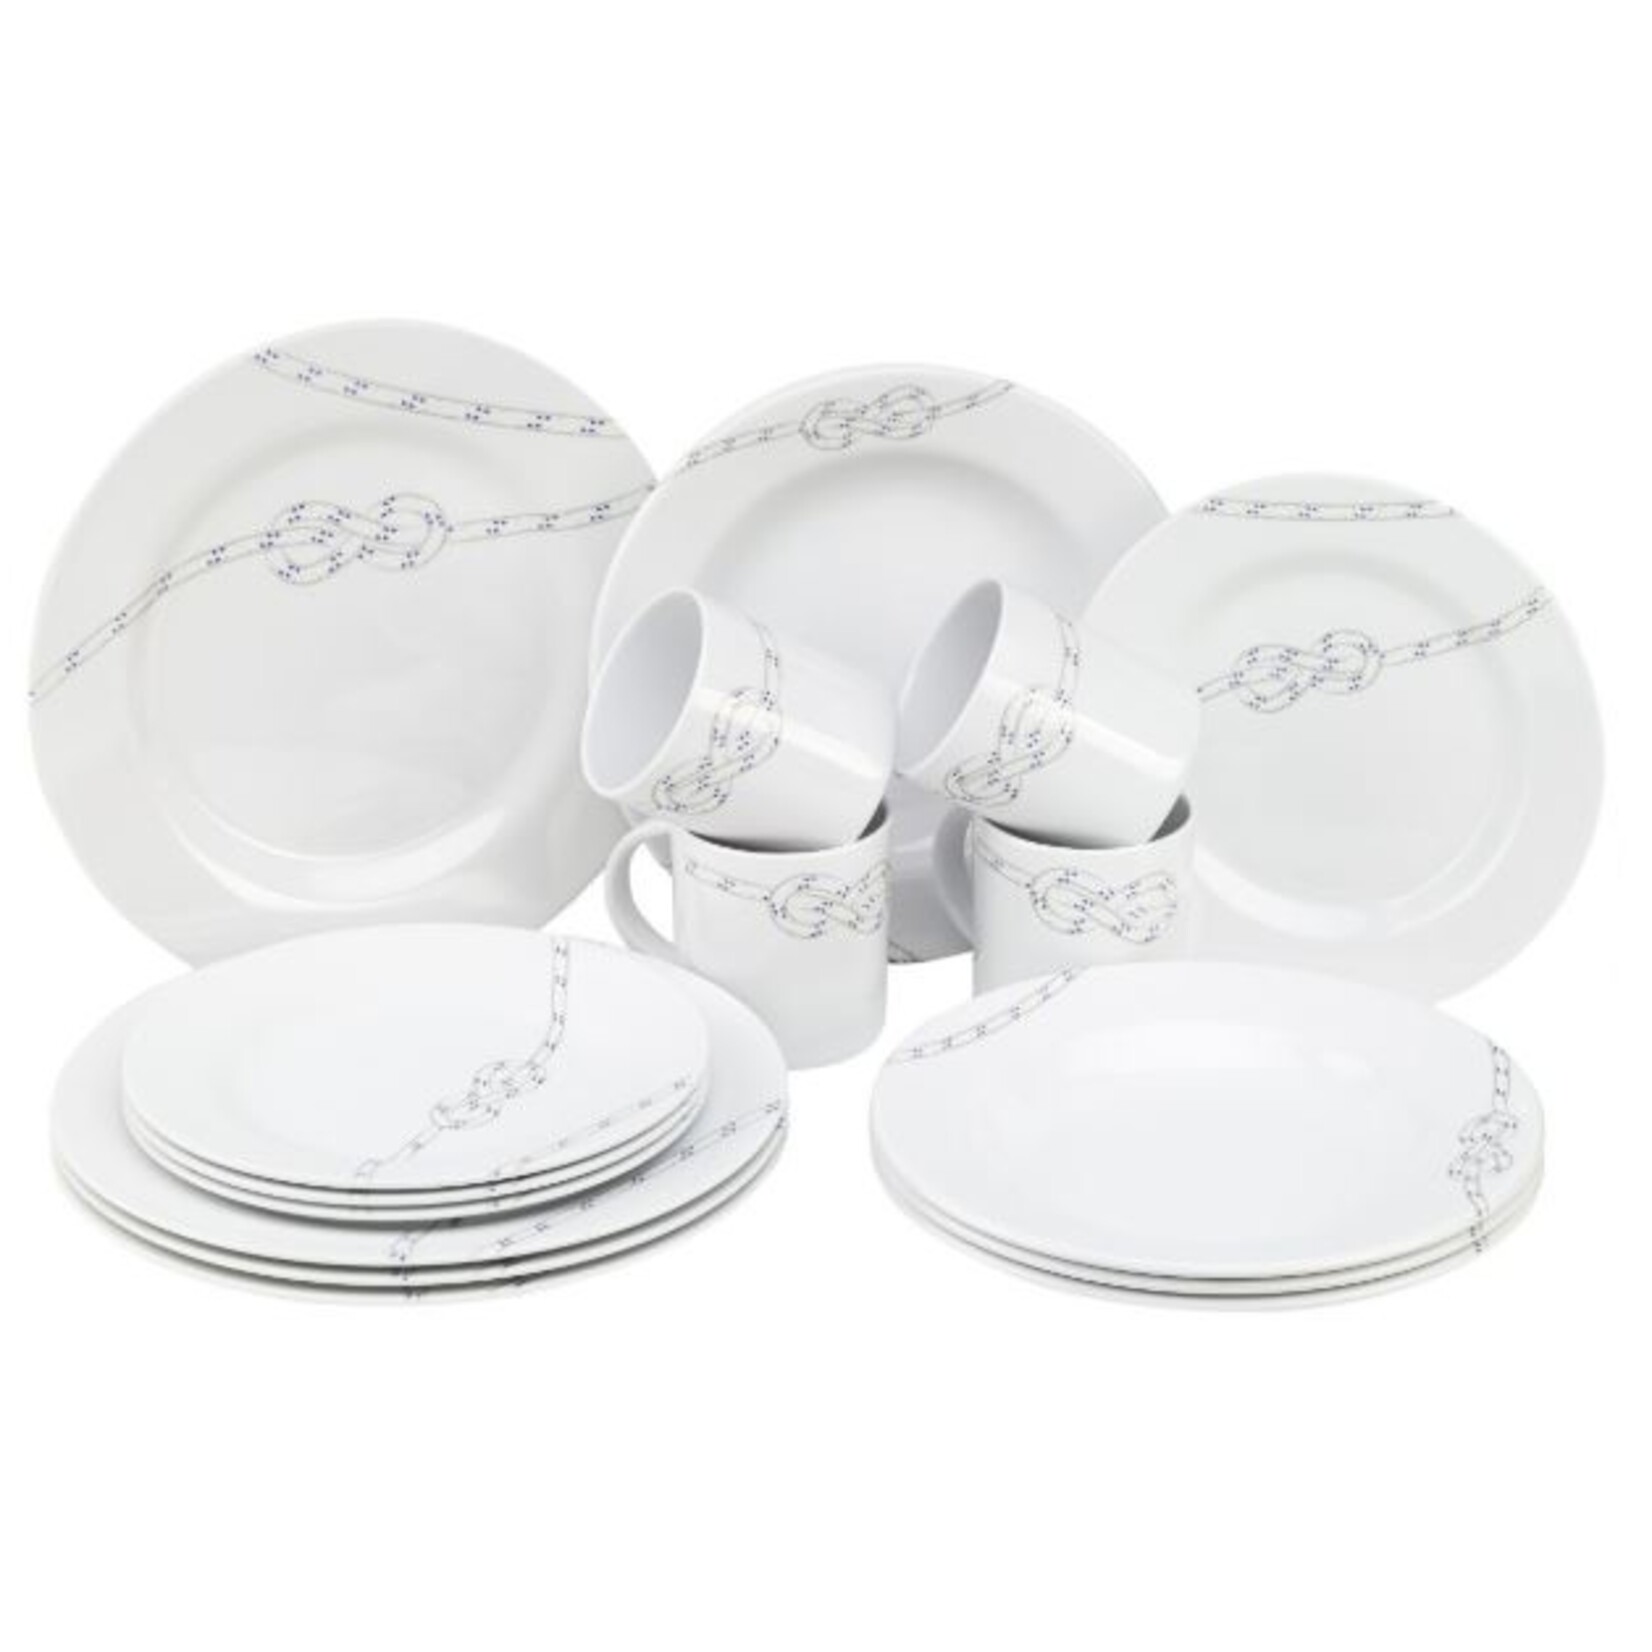 Plastimo South pacific tableware round